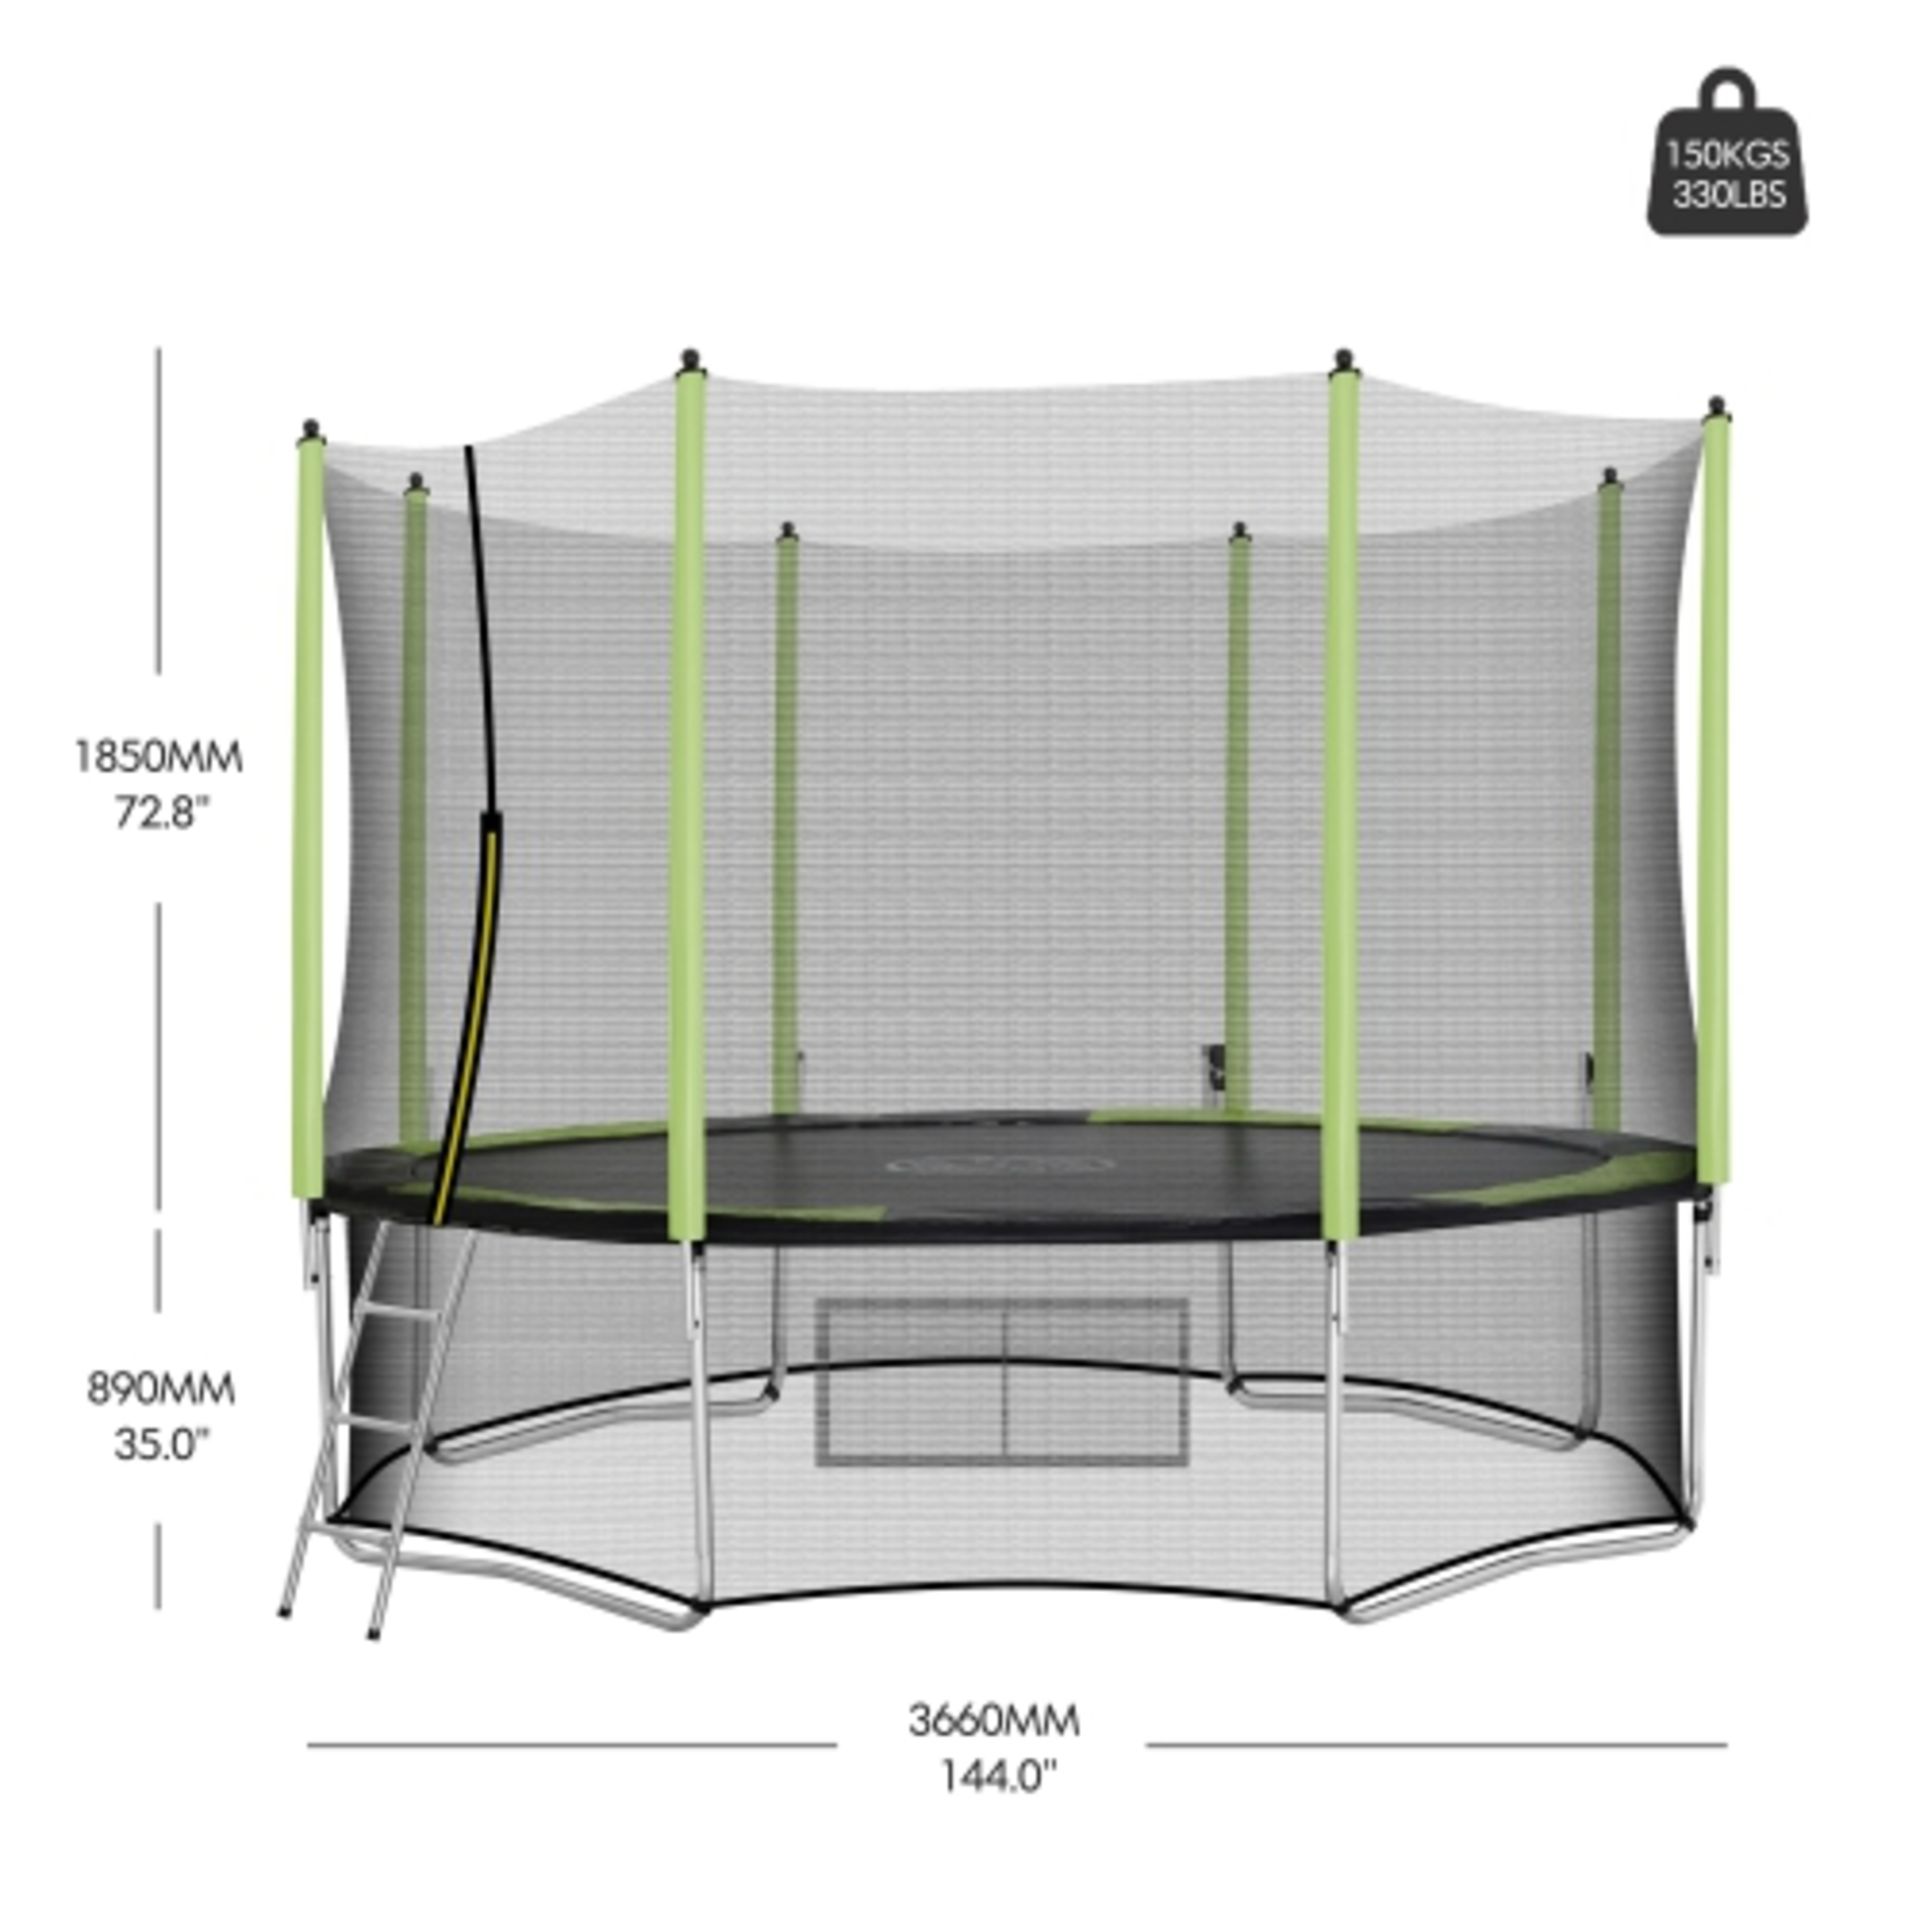 BRAND NEW Outdoor Trampoline with Safety Enclosure Net and Ladder - 12 Ft Backyard Trampolines for